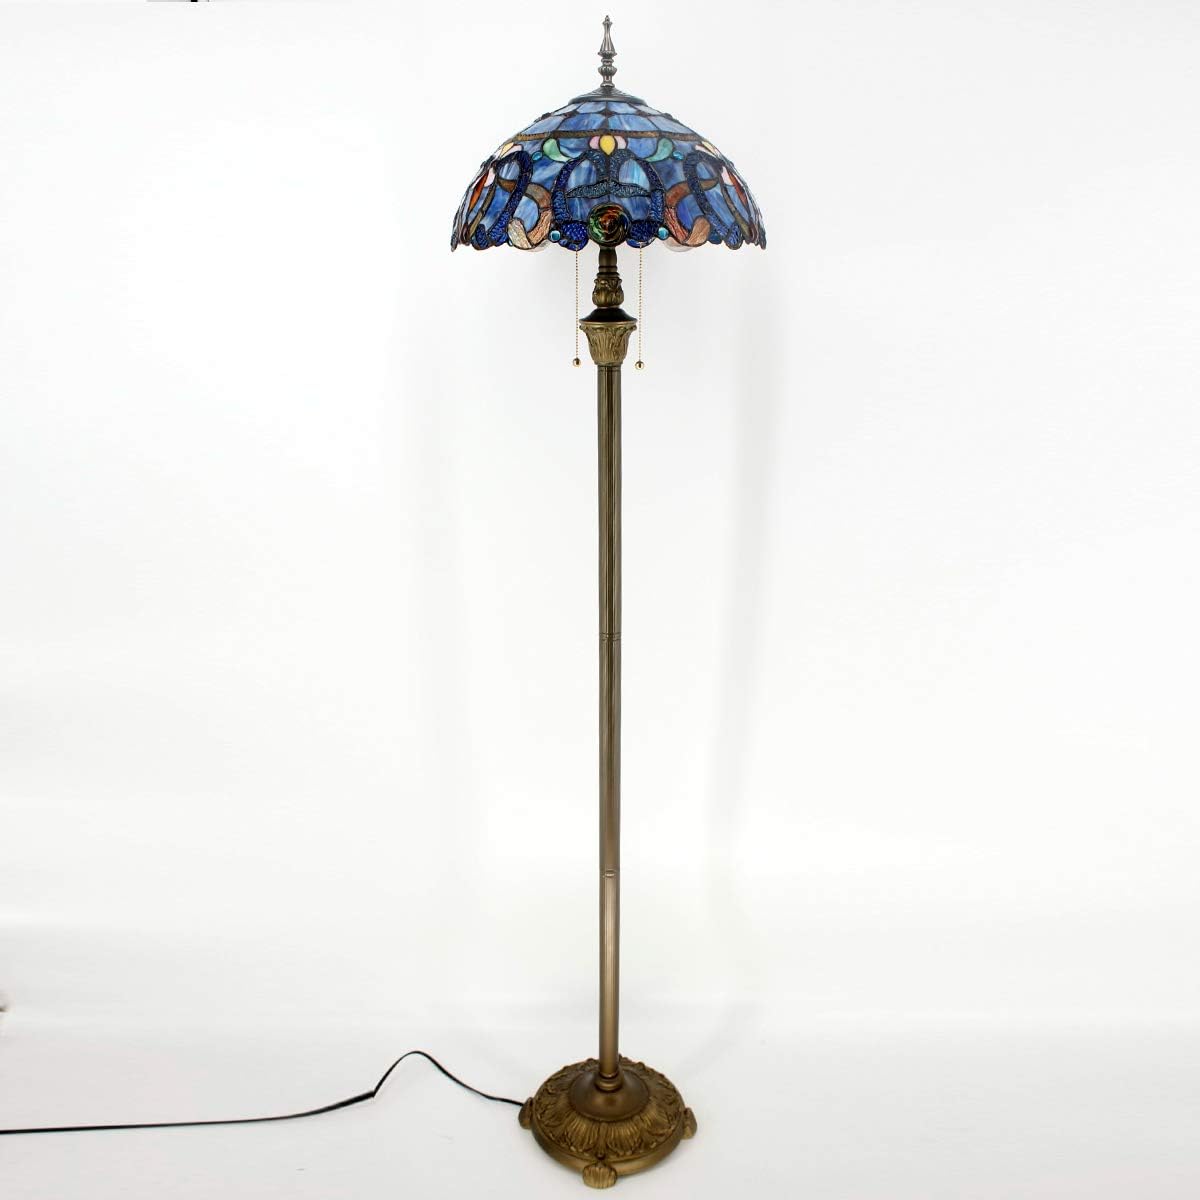 BBNBDMZ  Floor Lamp Blue Purple Cloudy Stained Glass Standing Reading Light 16X16X64 Inches Antique Pole Corner Lamp Decor Bedroom Living Room  Office S558 Series